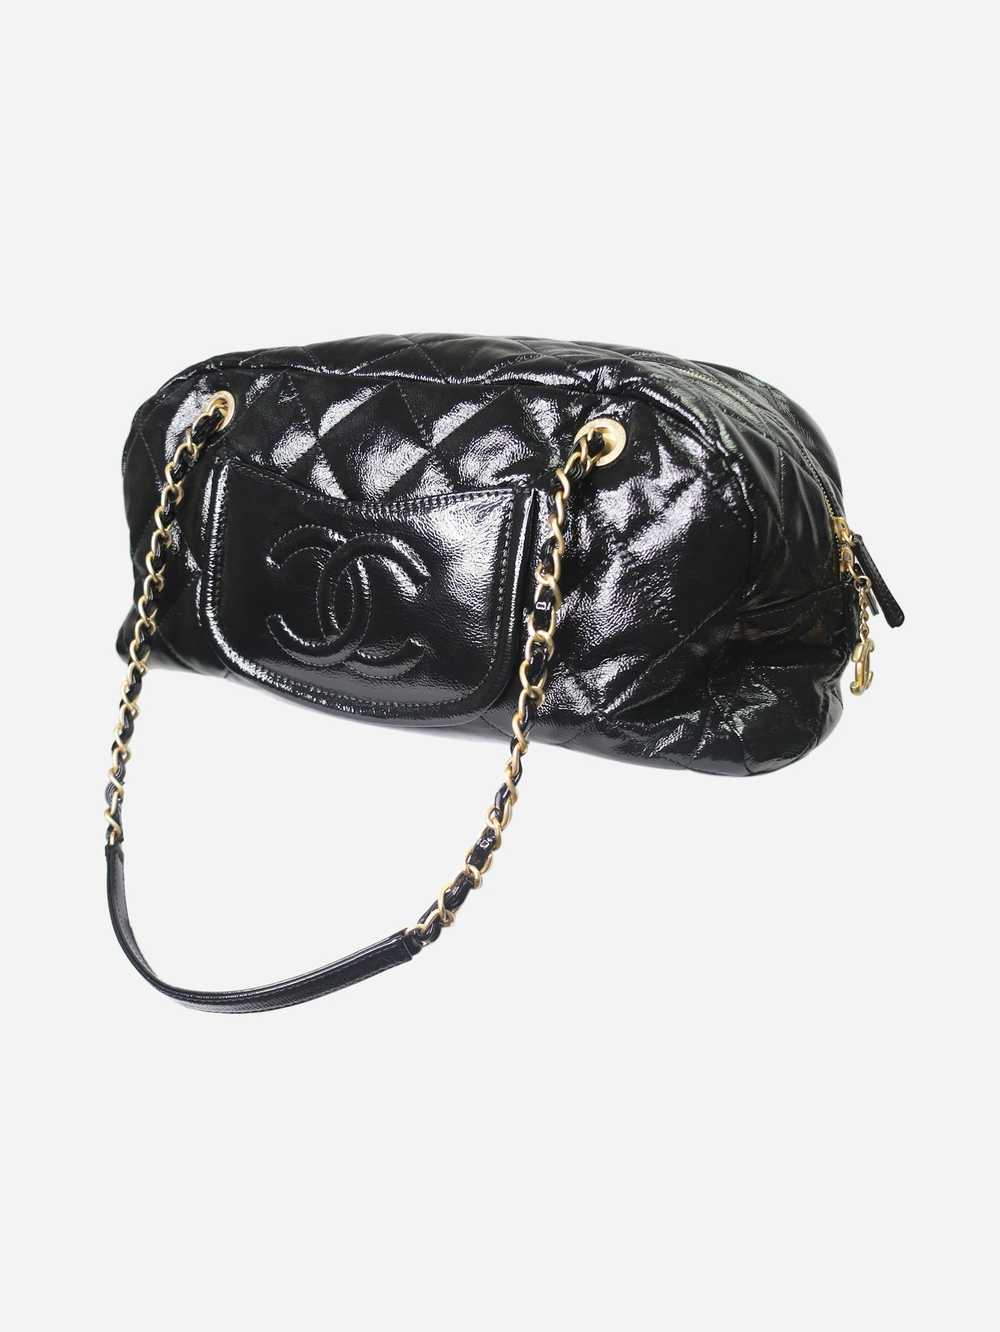 Chanel Black 2020 patent leather bowling bag - image 5